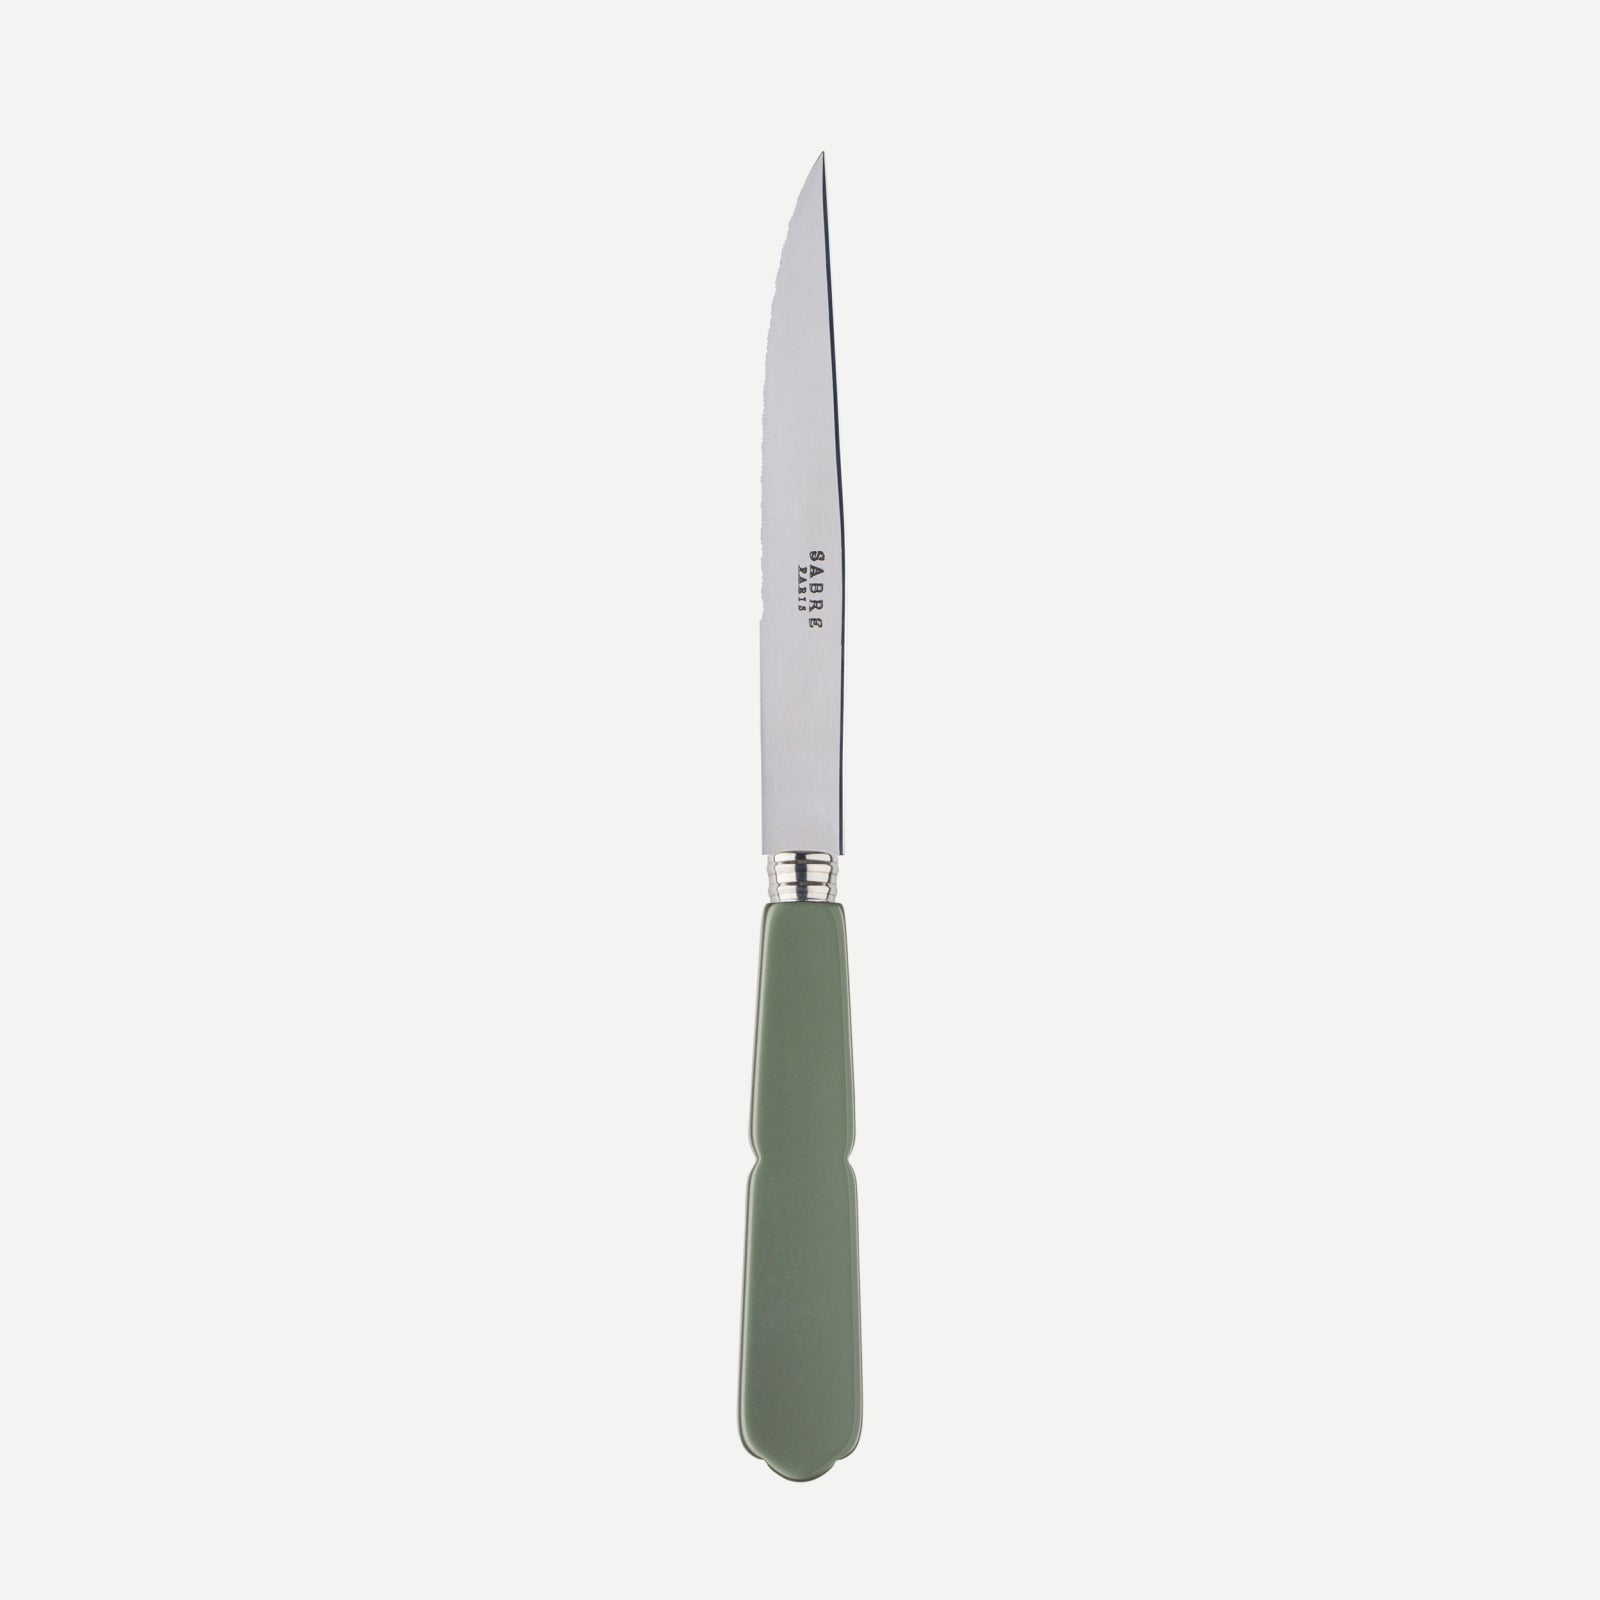 Steack knife - Gustave - Moss